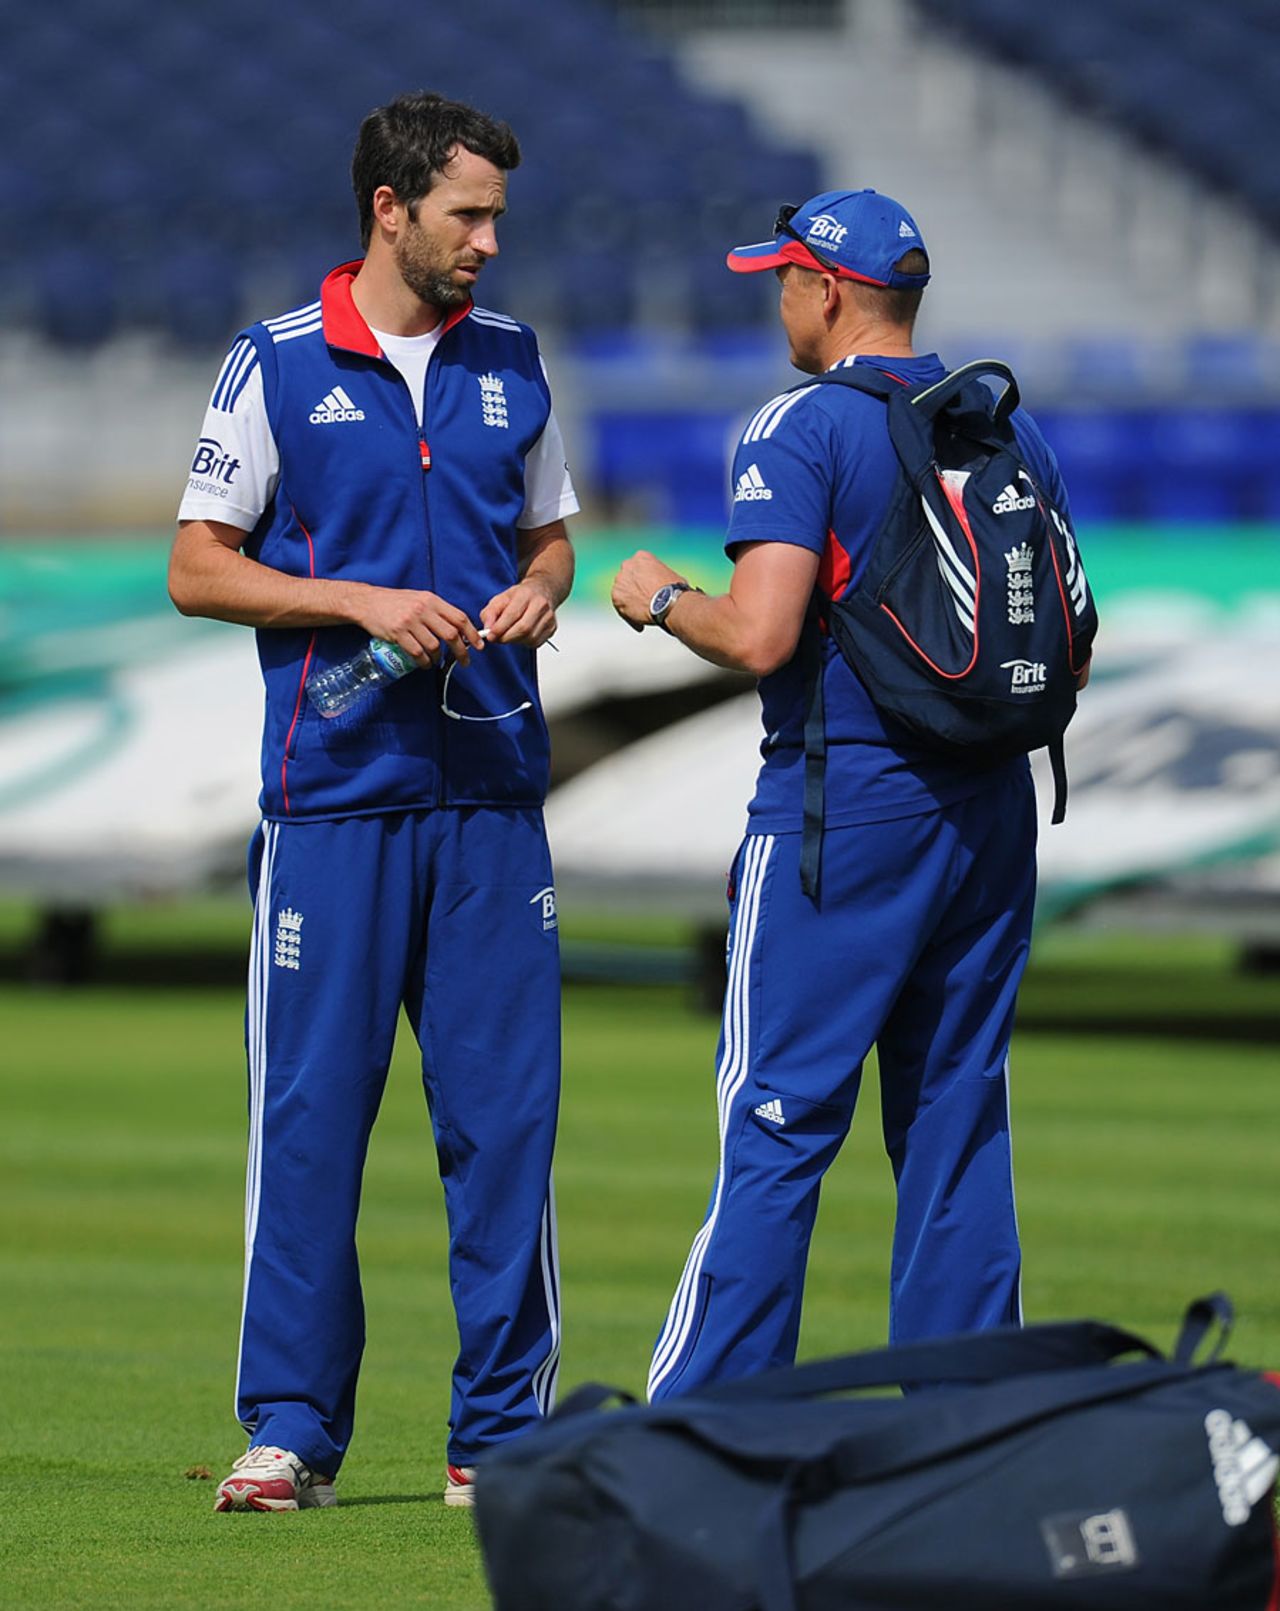 Graham Onions chats with Andy Flower, Chester-le-Street, August 7, 2013